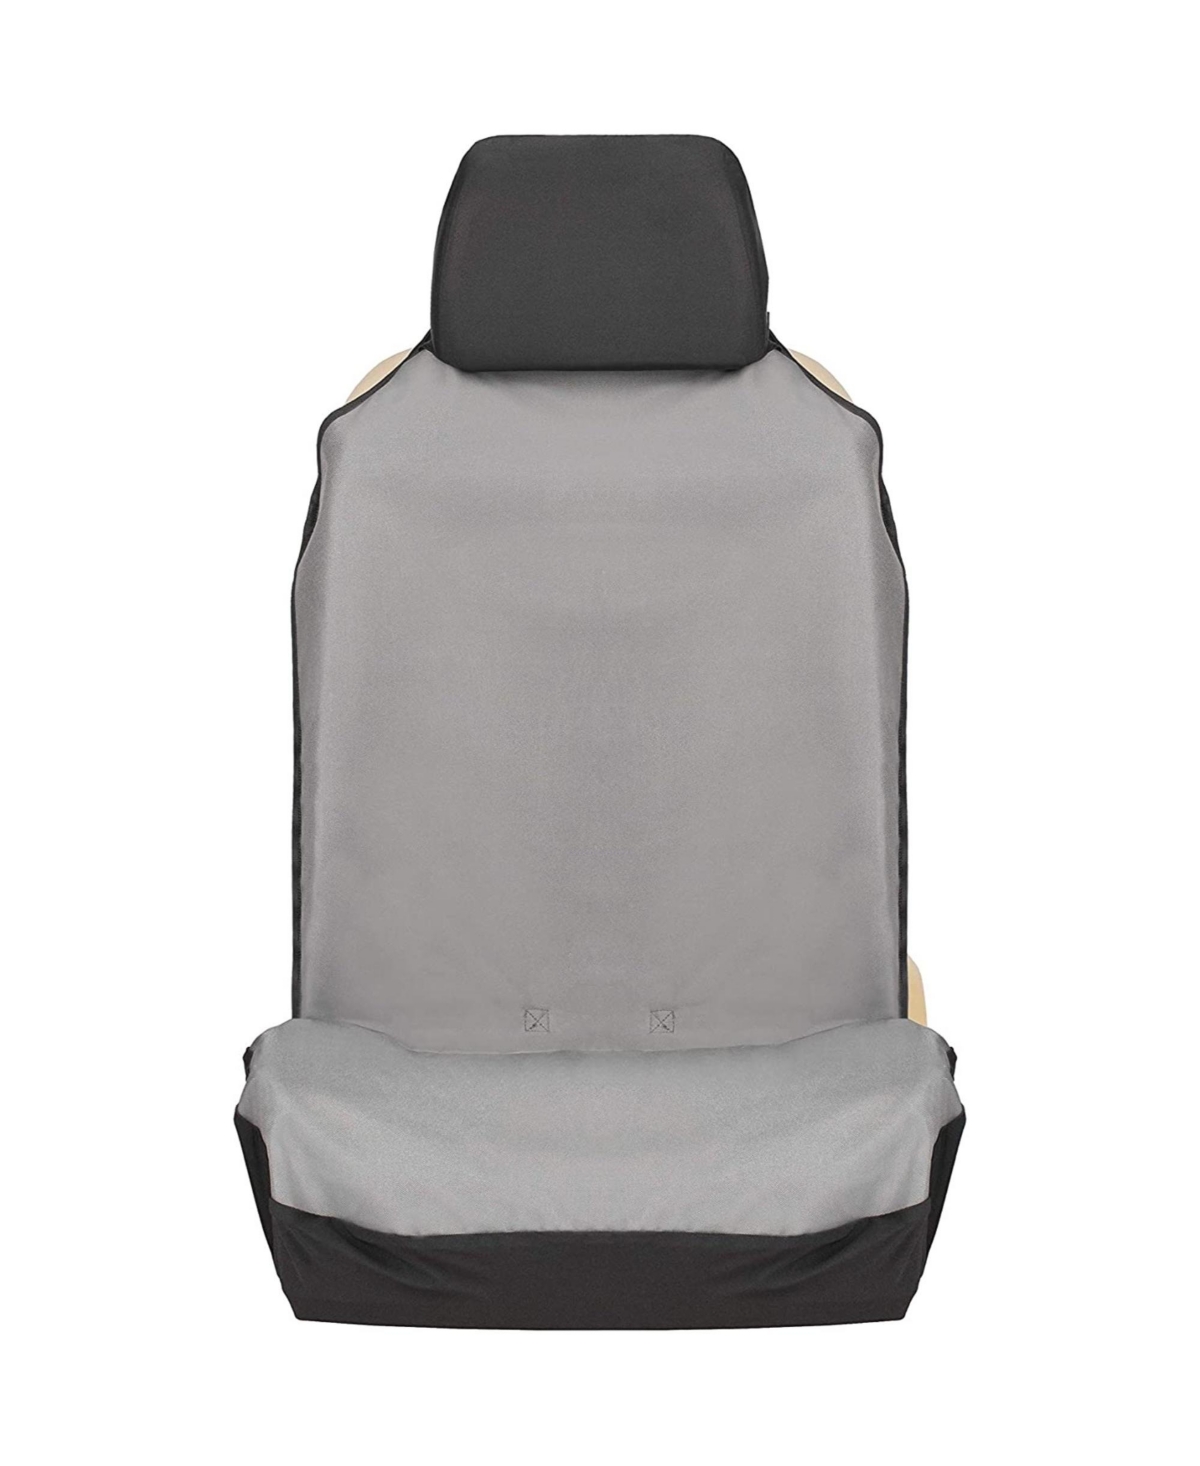 Happy Ride Bucket Seat Cover for Dogs, Grey - Multi